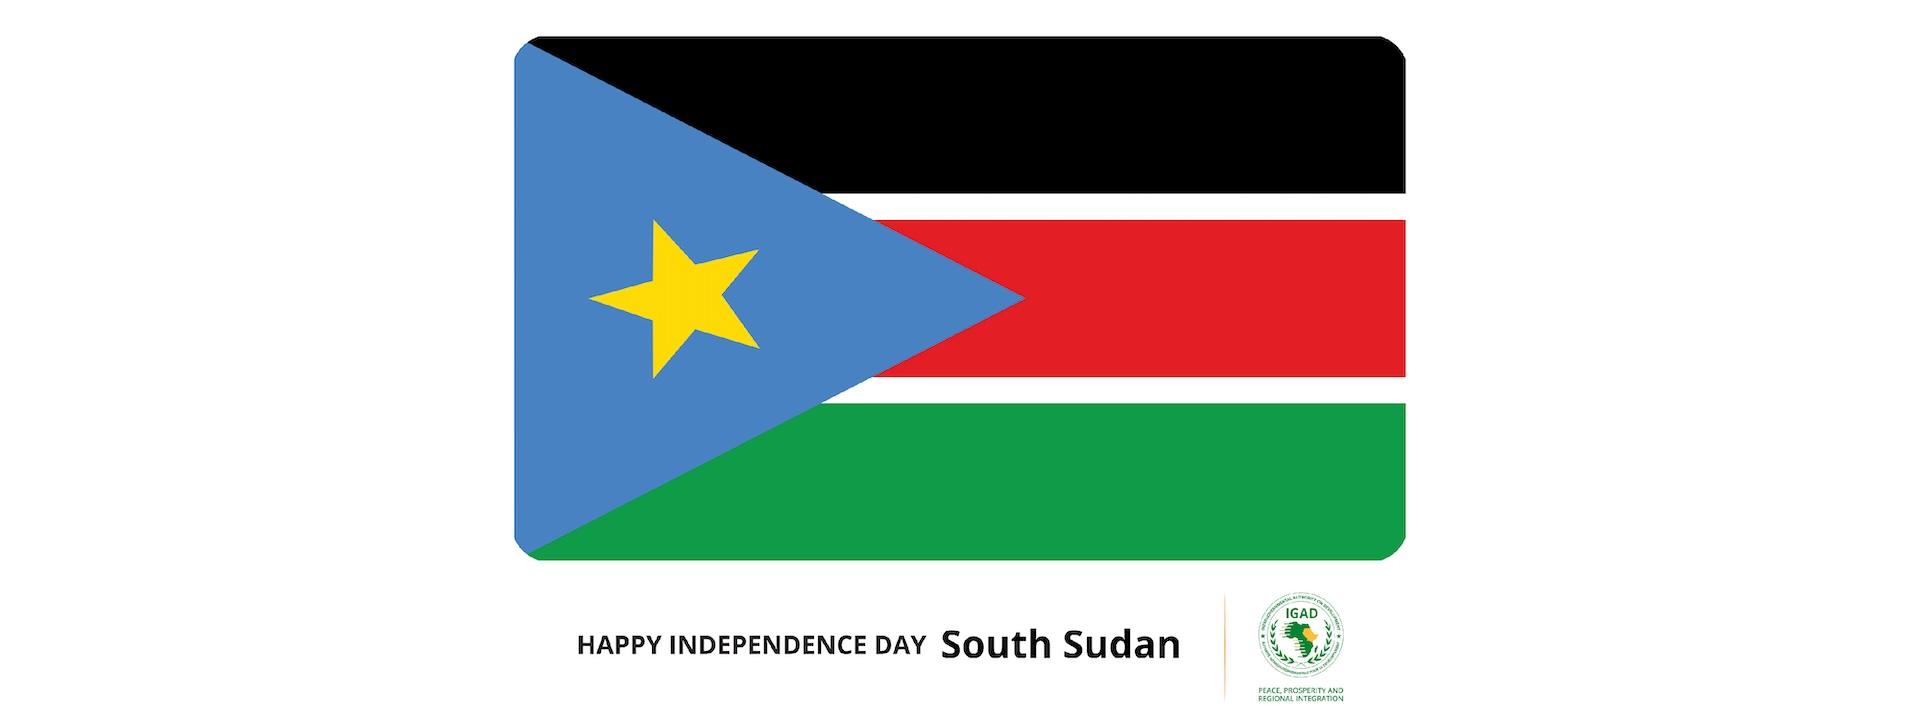 Happy Independence Day South Sudan